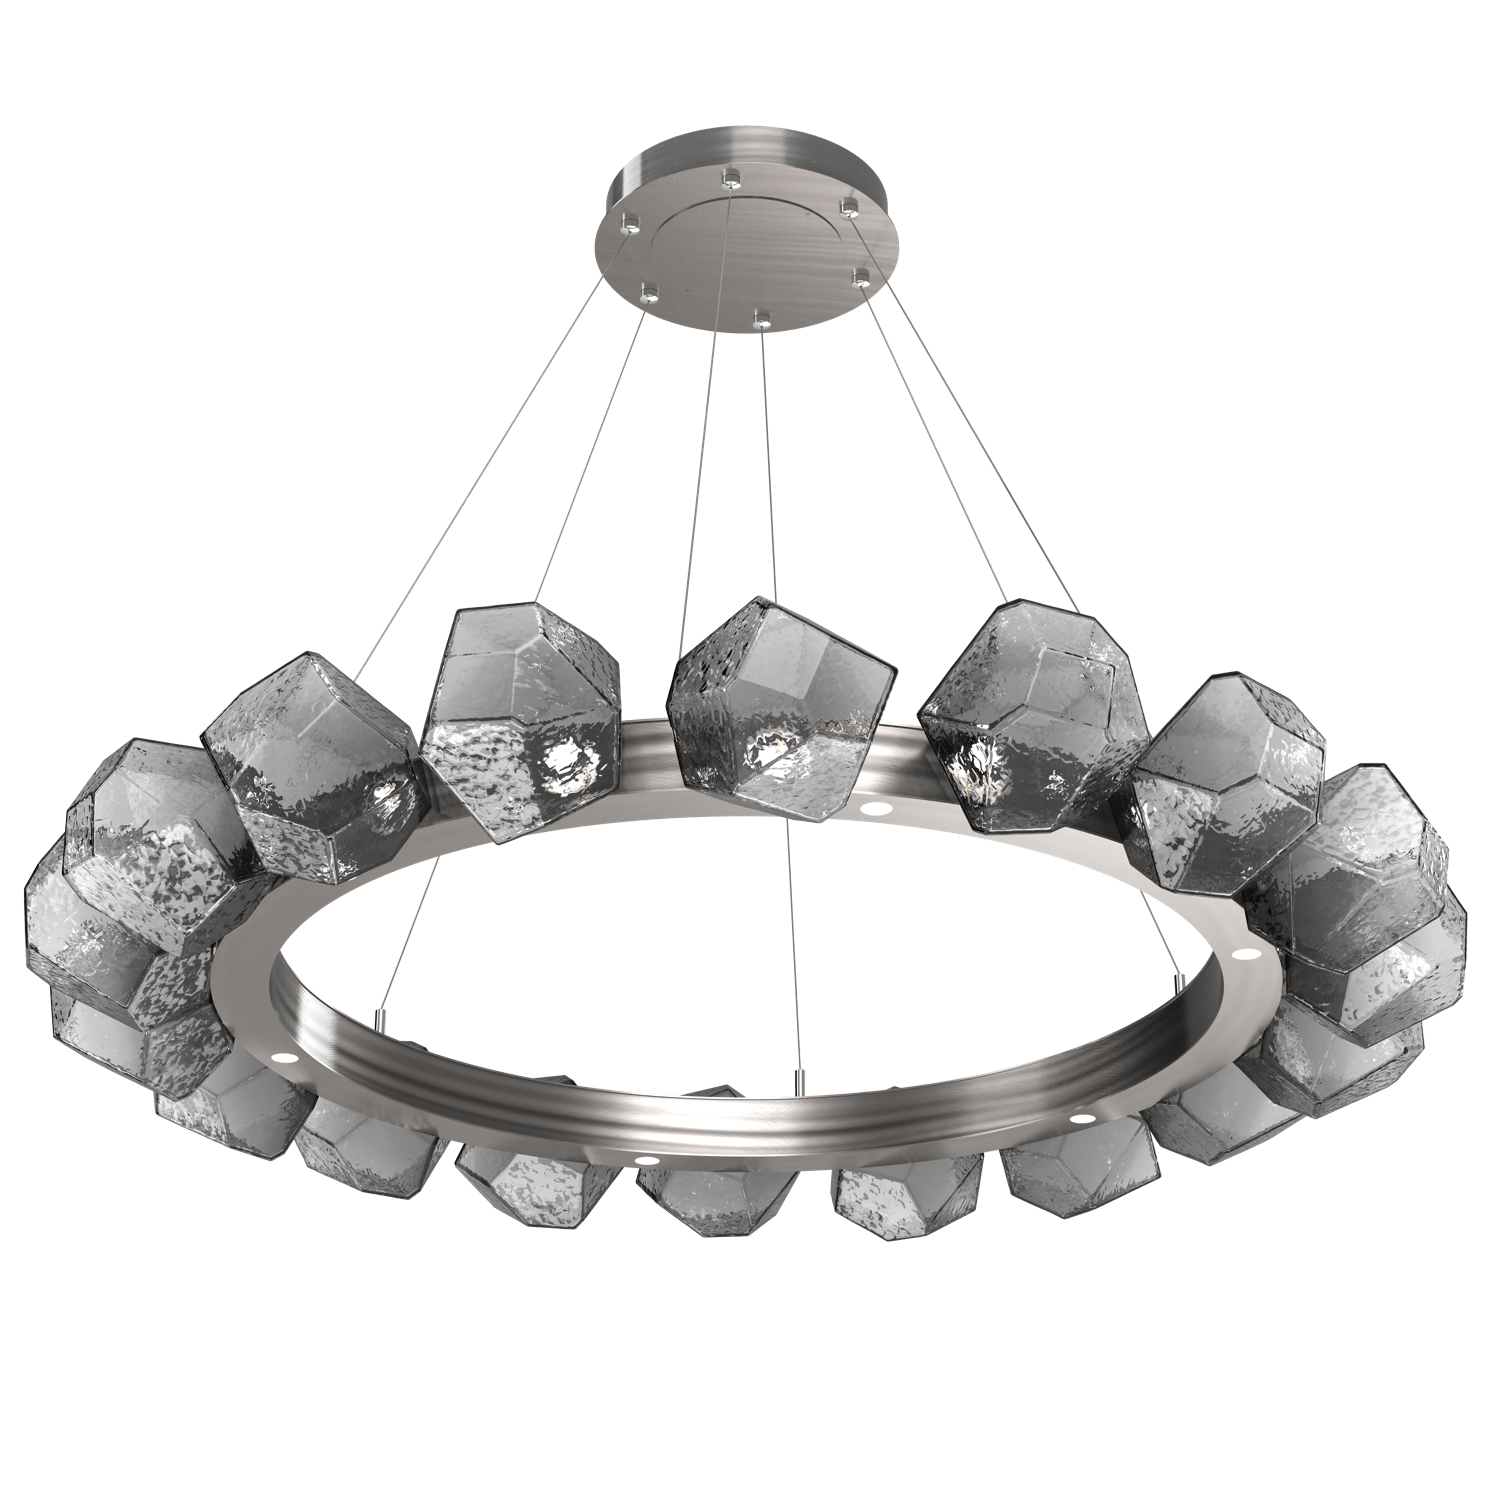 CHB0039-48-GM-S-Hammerton-Studio-Gem-48-inch-radial-ring-chandelier-with-gunmetal-finish-and-smoke-blown-glass-shades-and-LED-lamping